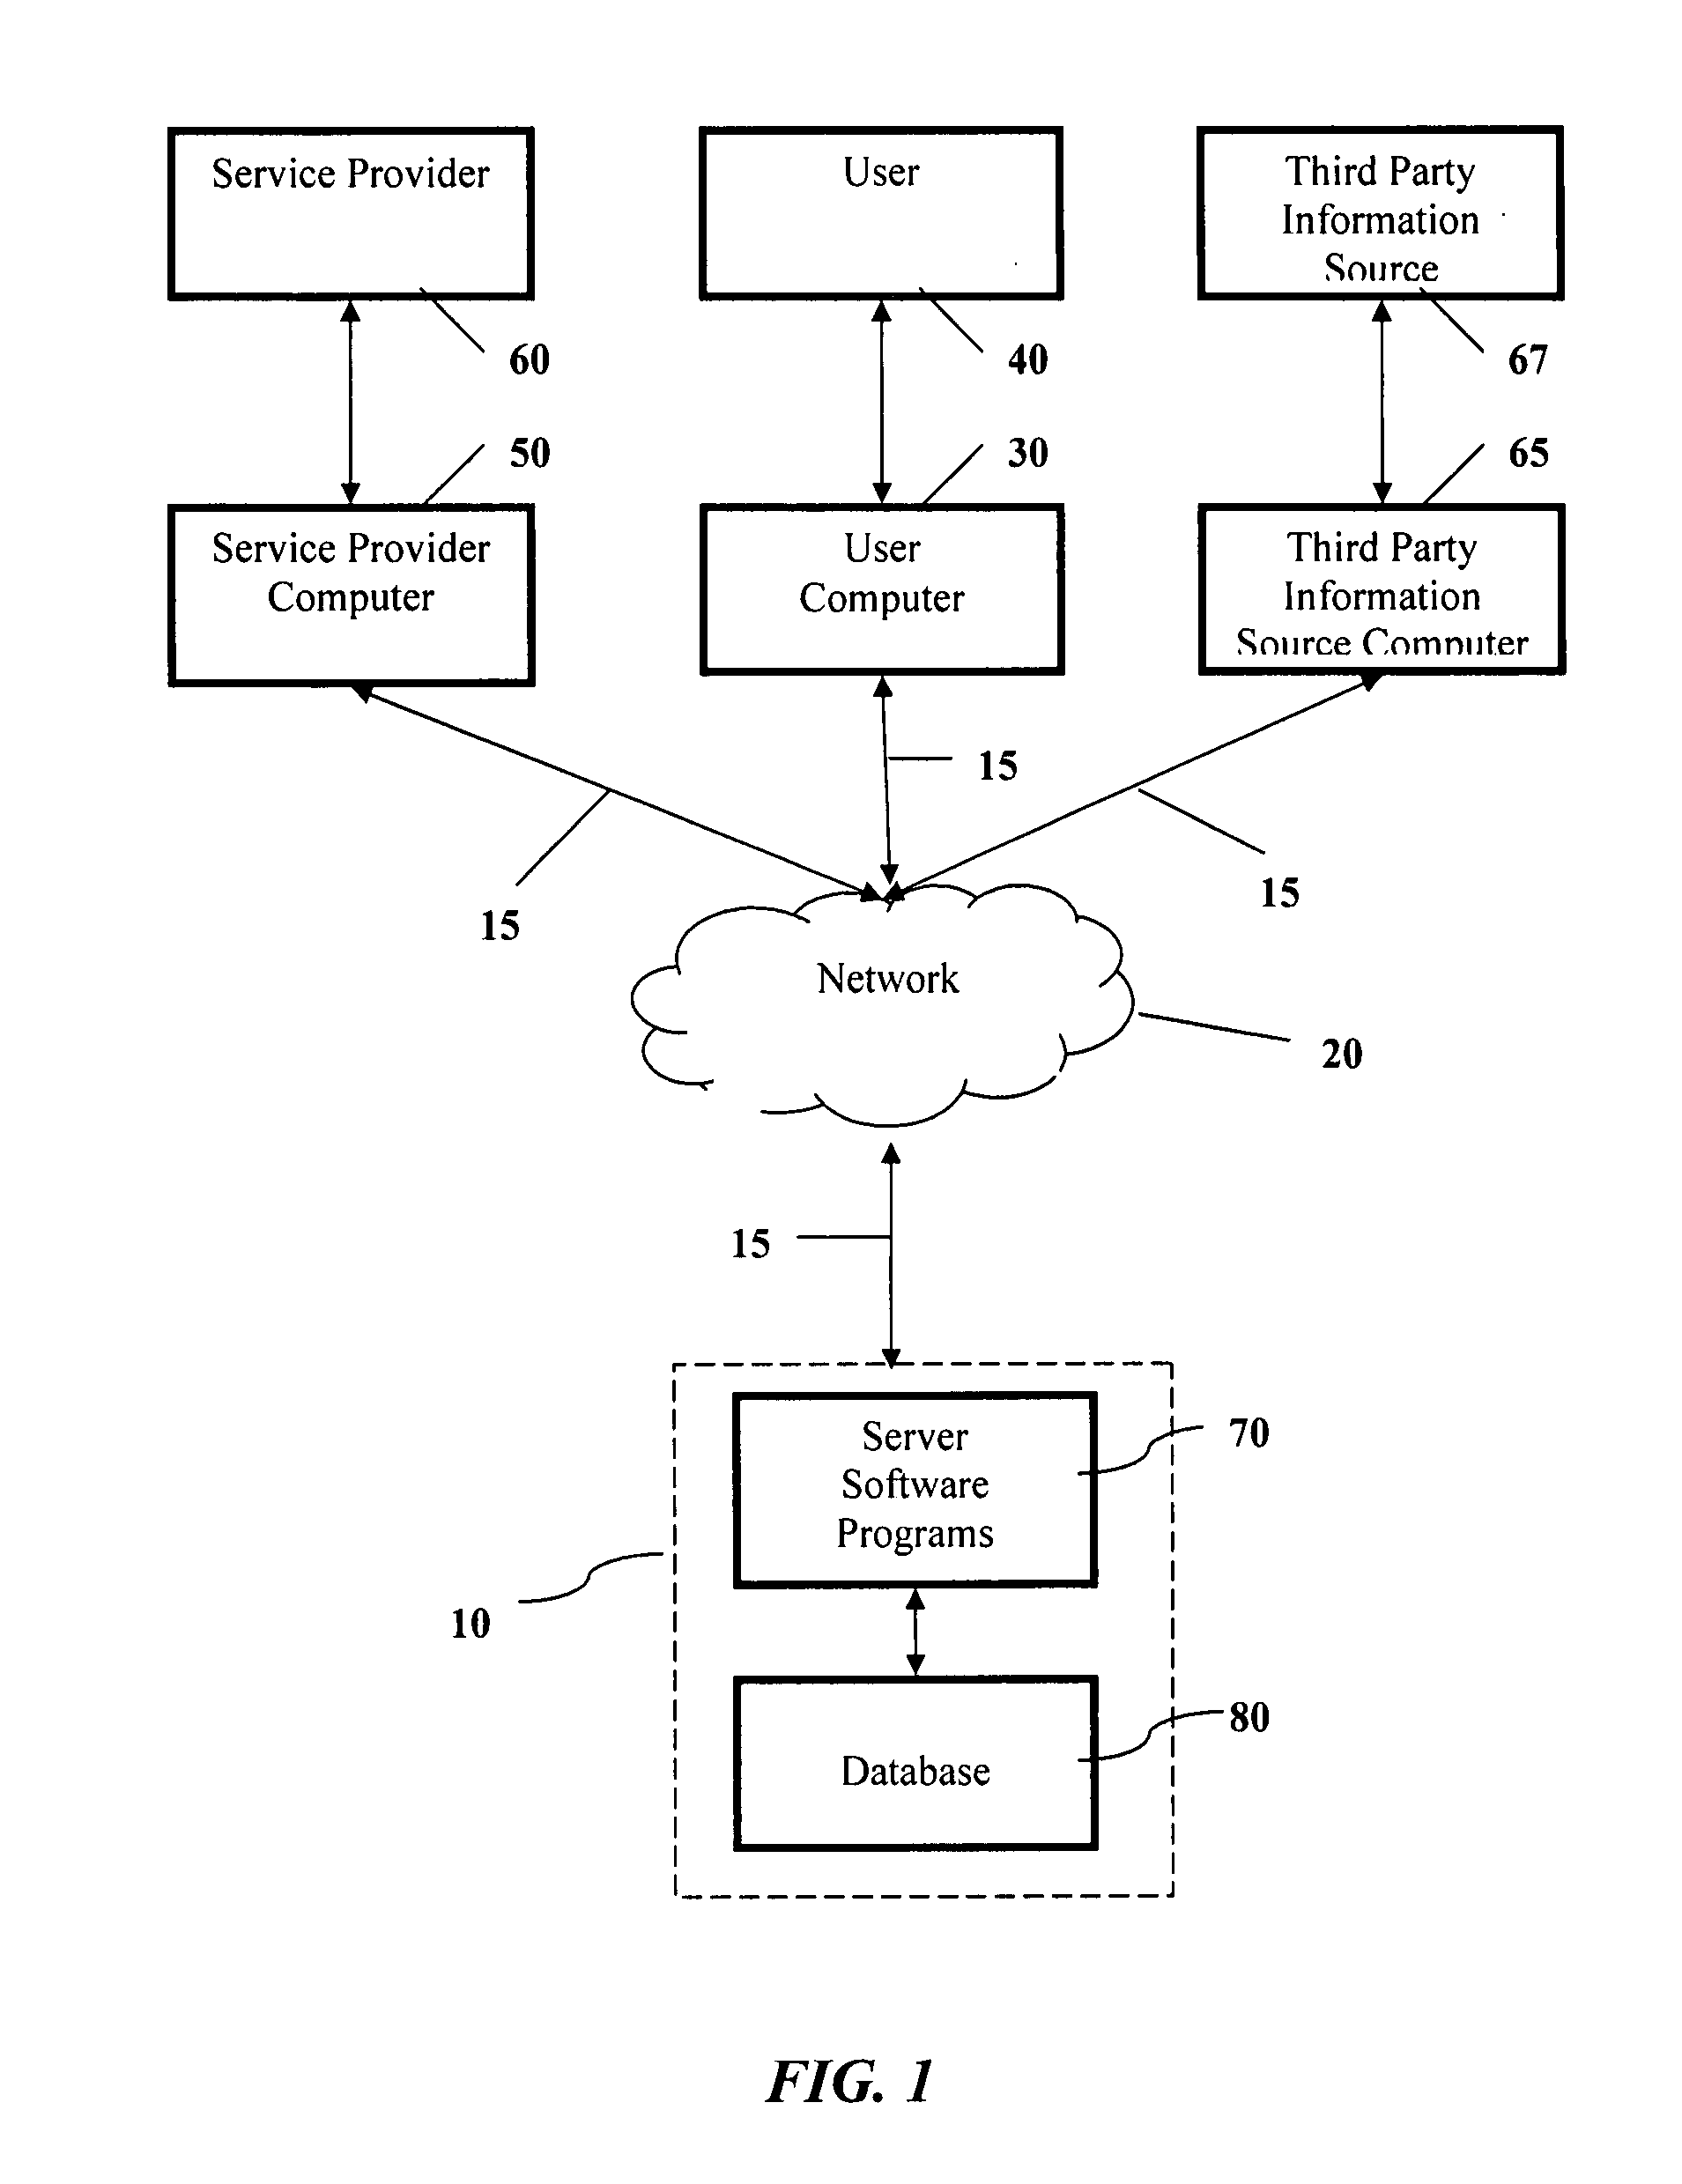 Information storage and management system and method for automating online requests and transactions